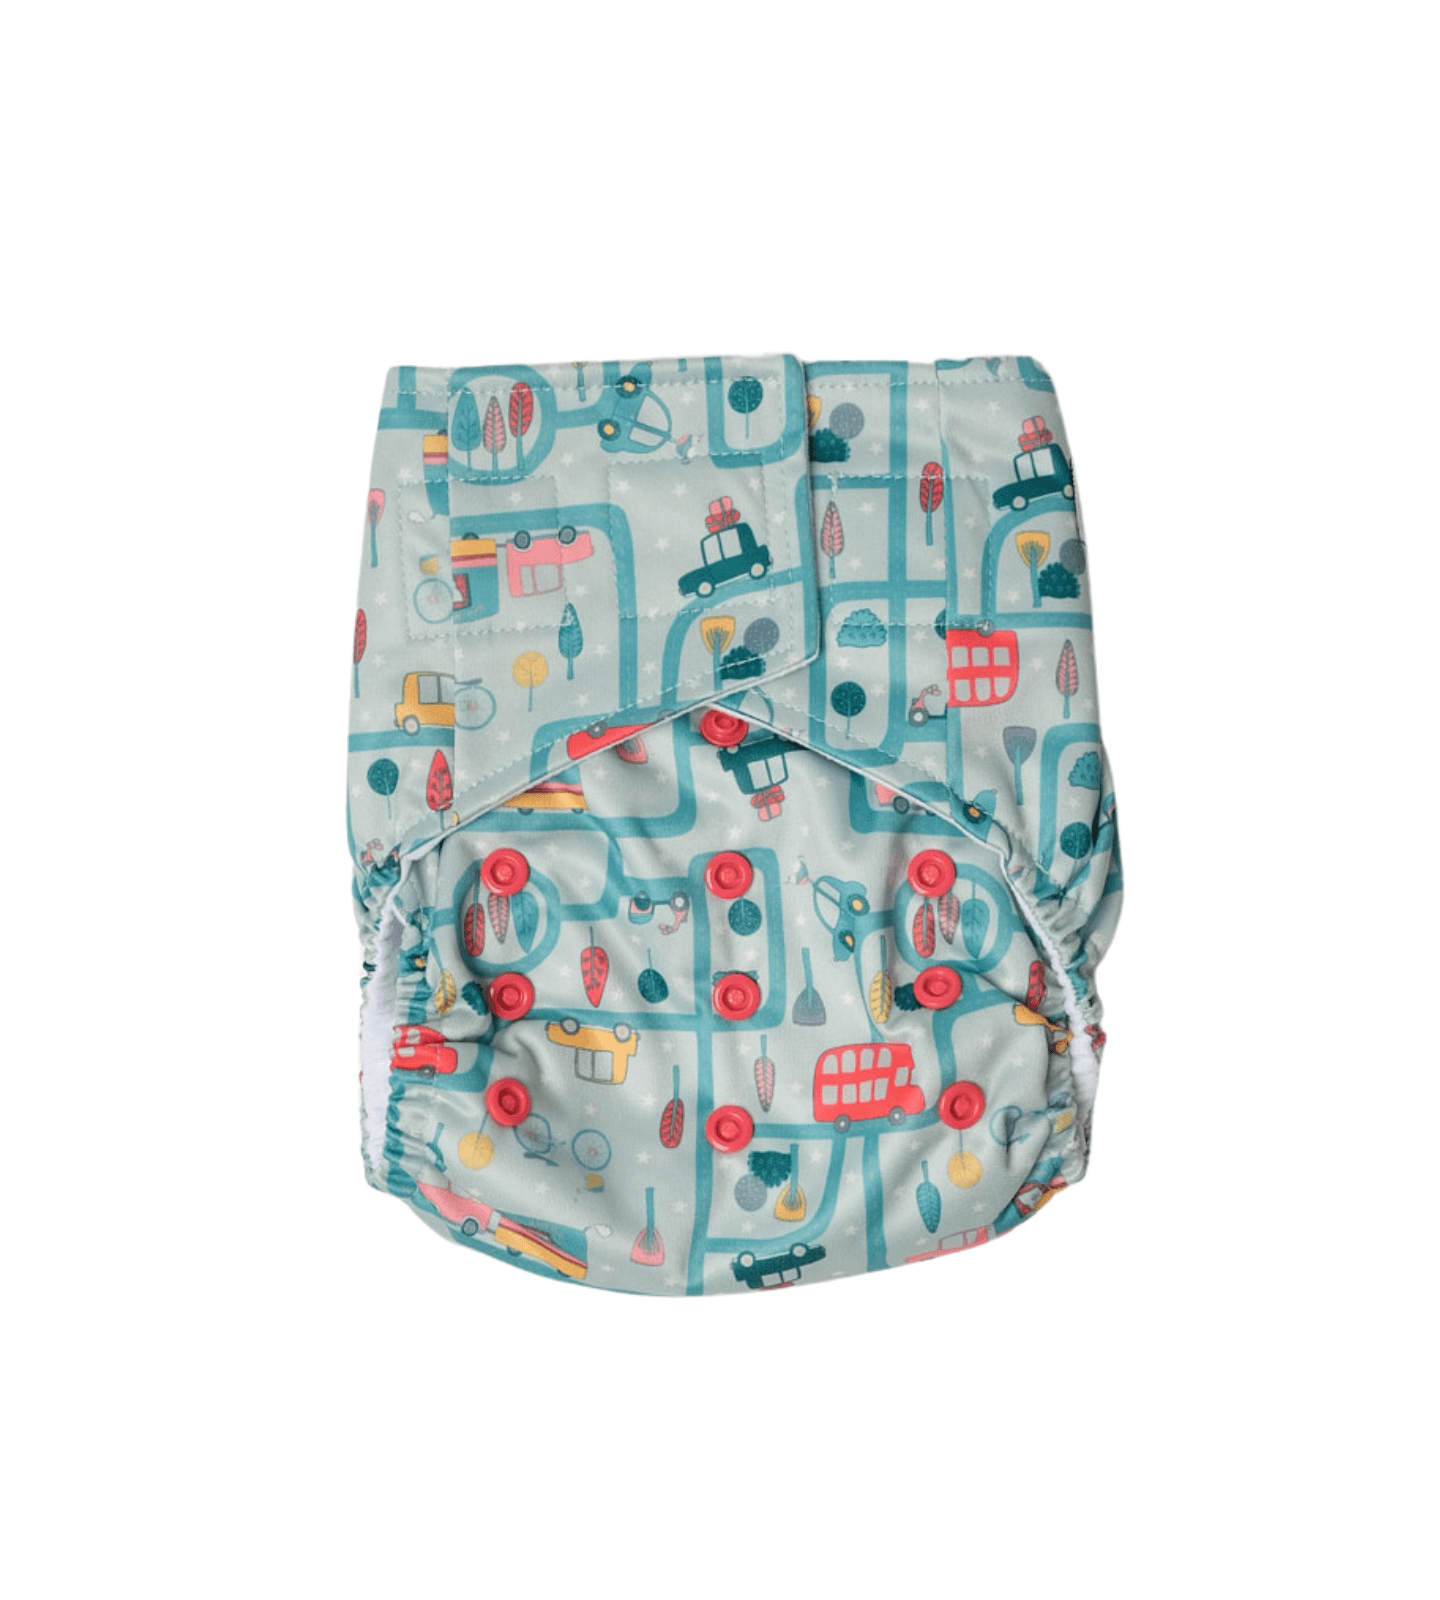 Snazzi Pants All in One Cloth Nappy - Brolly Sheets NZ - Busty Street